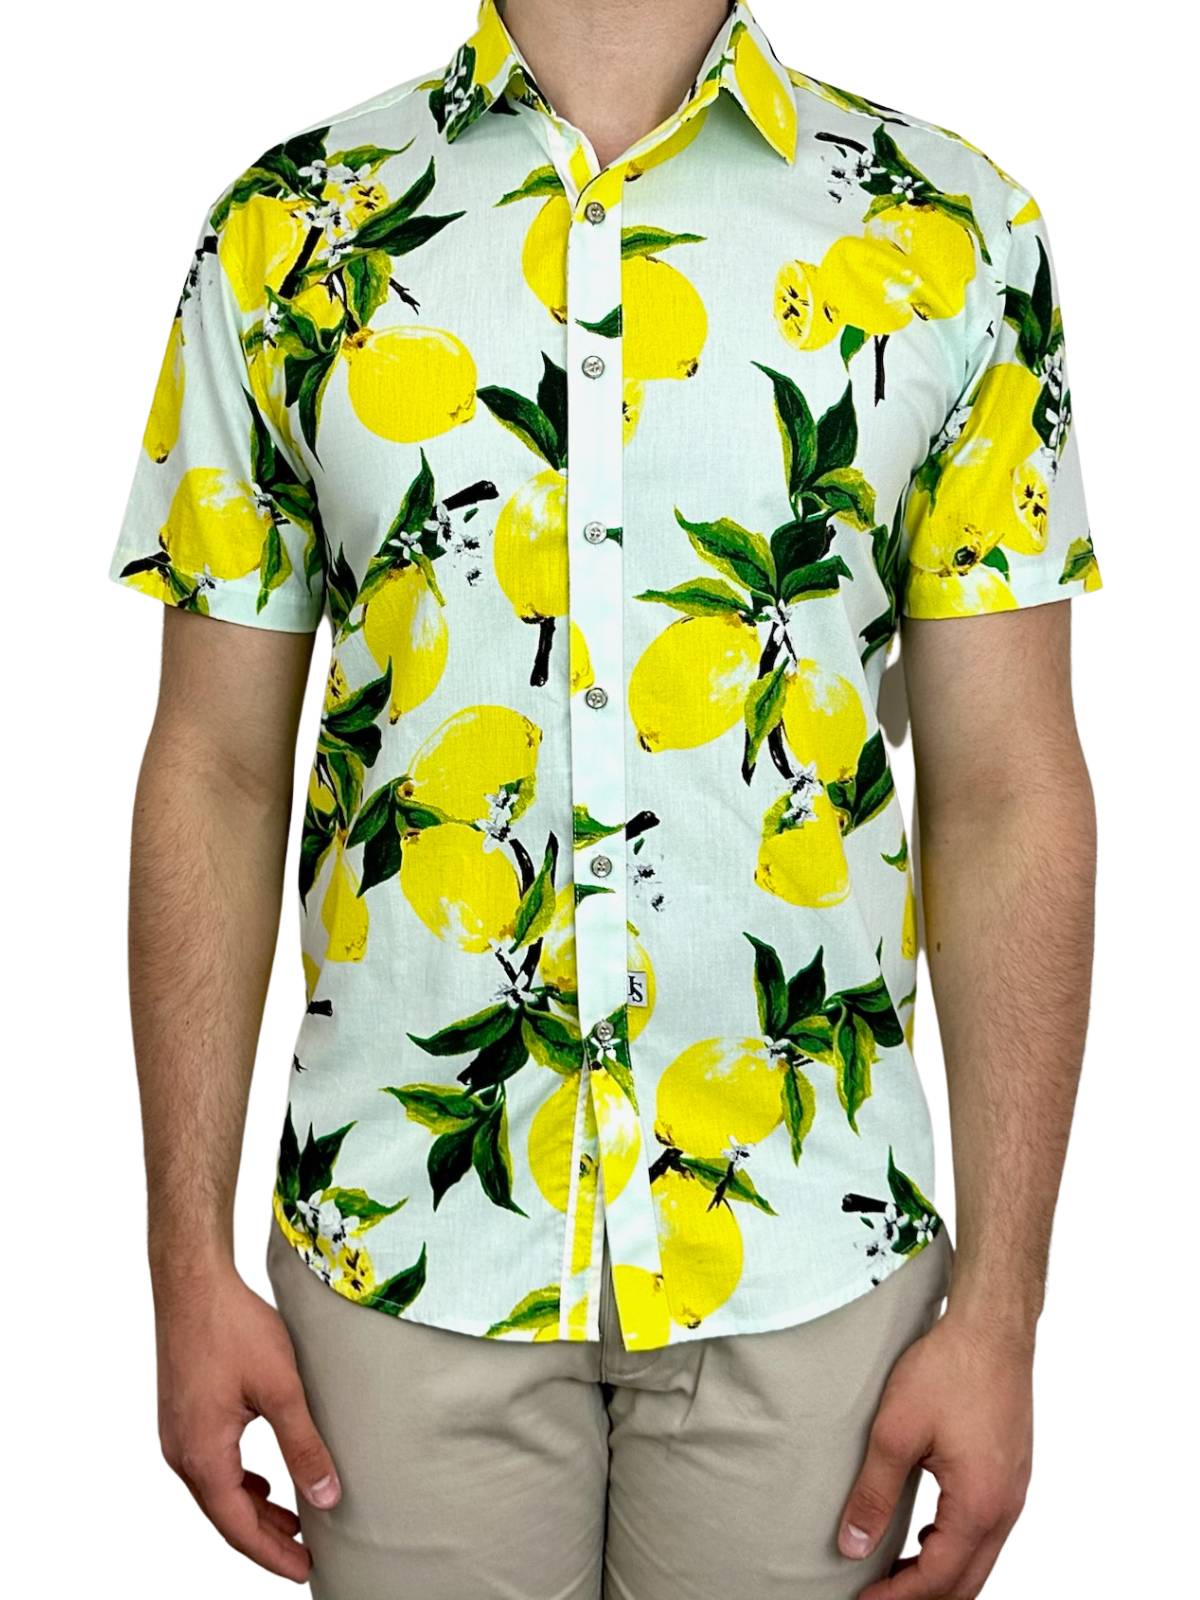 Zesty Floral Cotton S/S Shirt - Yellow/Green